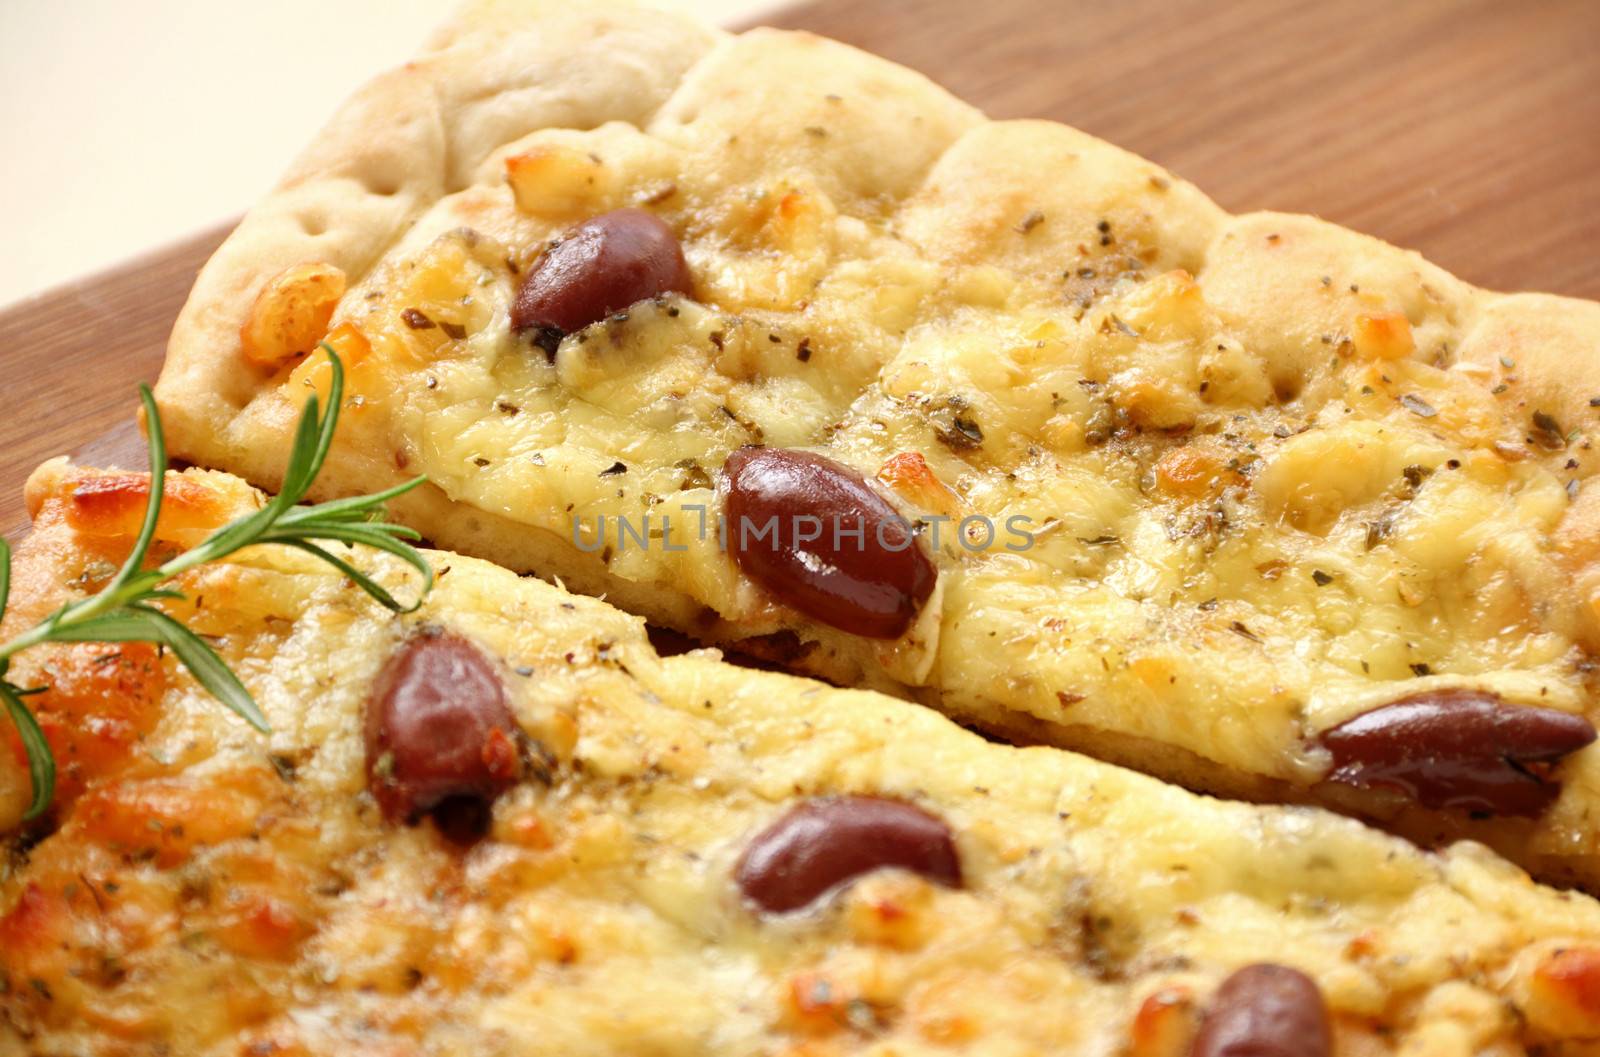 Rectangular gourmet pizza with cheese and olives ready to serve.